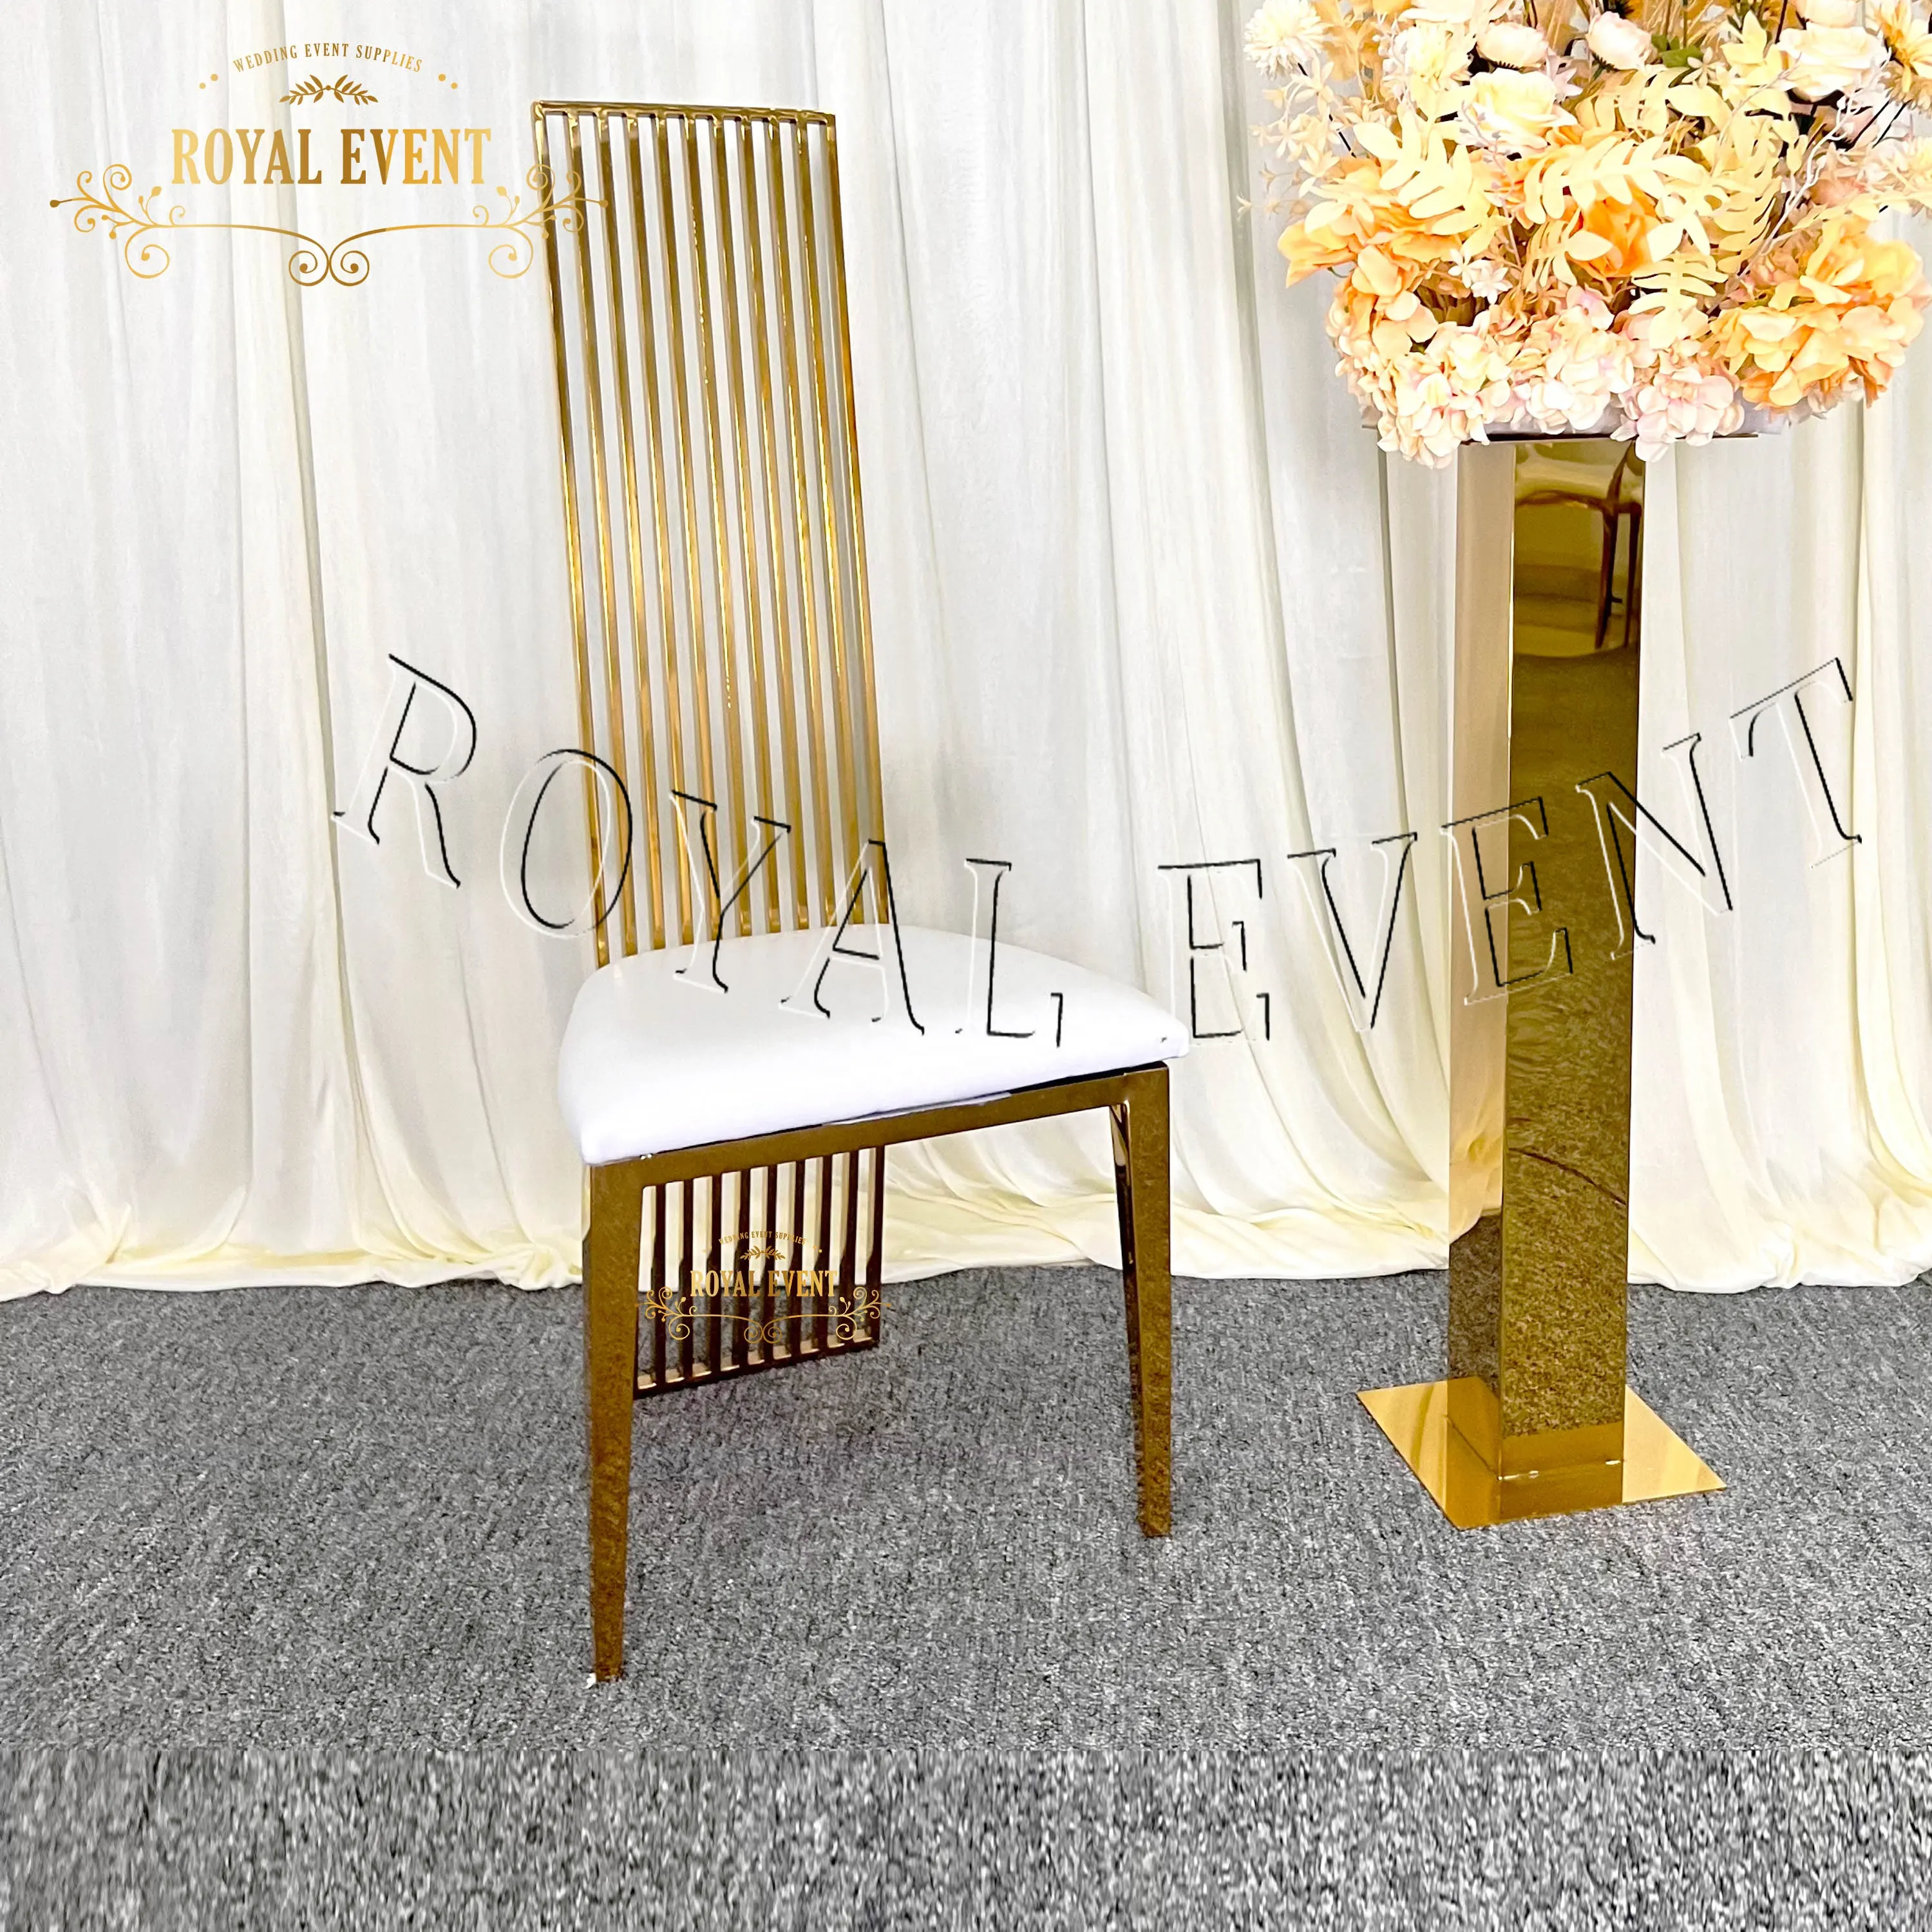 Hotel Furniture High Back Stainless Steel Chairs Elegant Reception Wedding Bridal Chair For Events